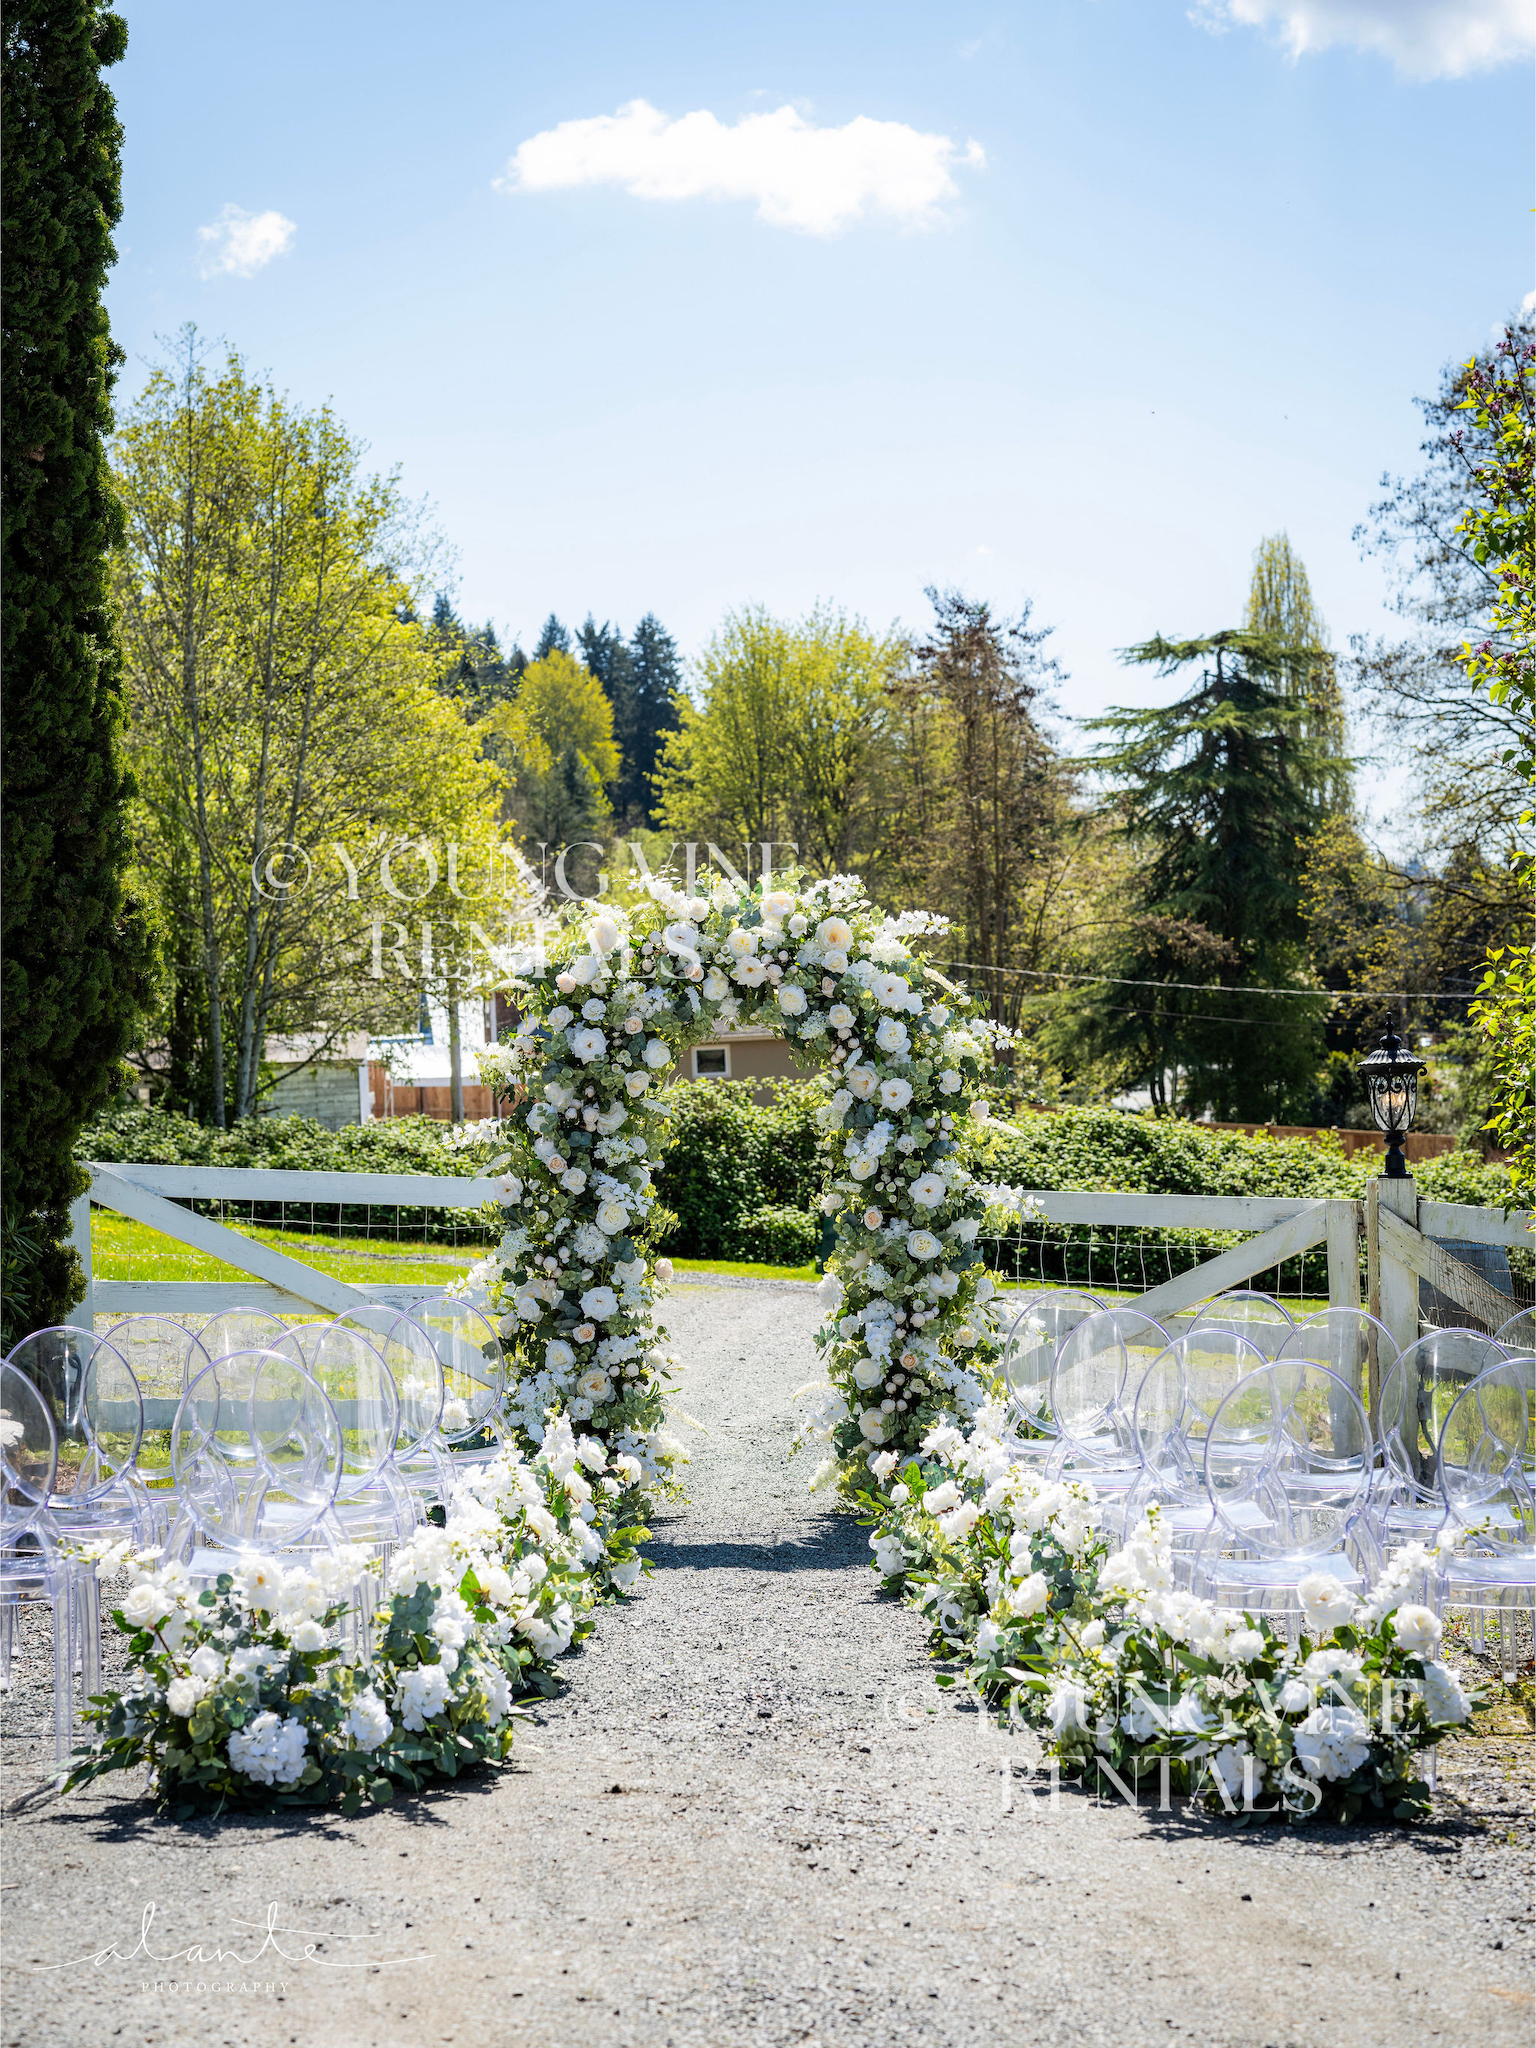 Outdoor winery wedding ceremony with clear acrylic Ghost chairs arranged in rows, accented by lush aisle arrangements in white and green, with a focal wedding arch in the center. The arbor is lush and romantic, and is studded with an abundance of ivory and white flowers and various types of eucalyptus foliage, 